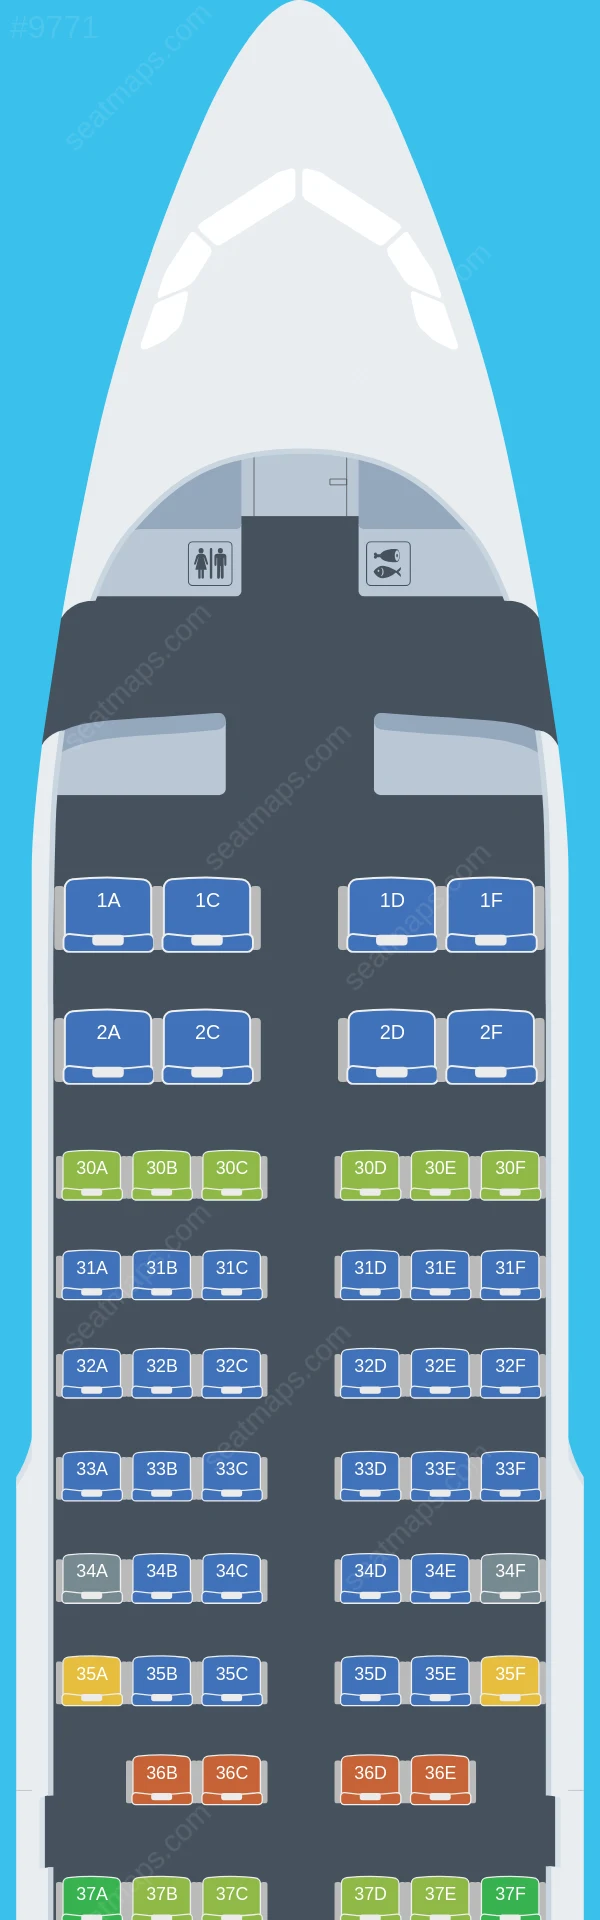 Sichuan Airlines Airbus A319-100 seatmap preview